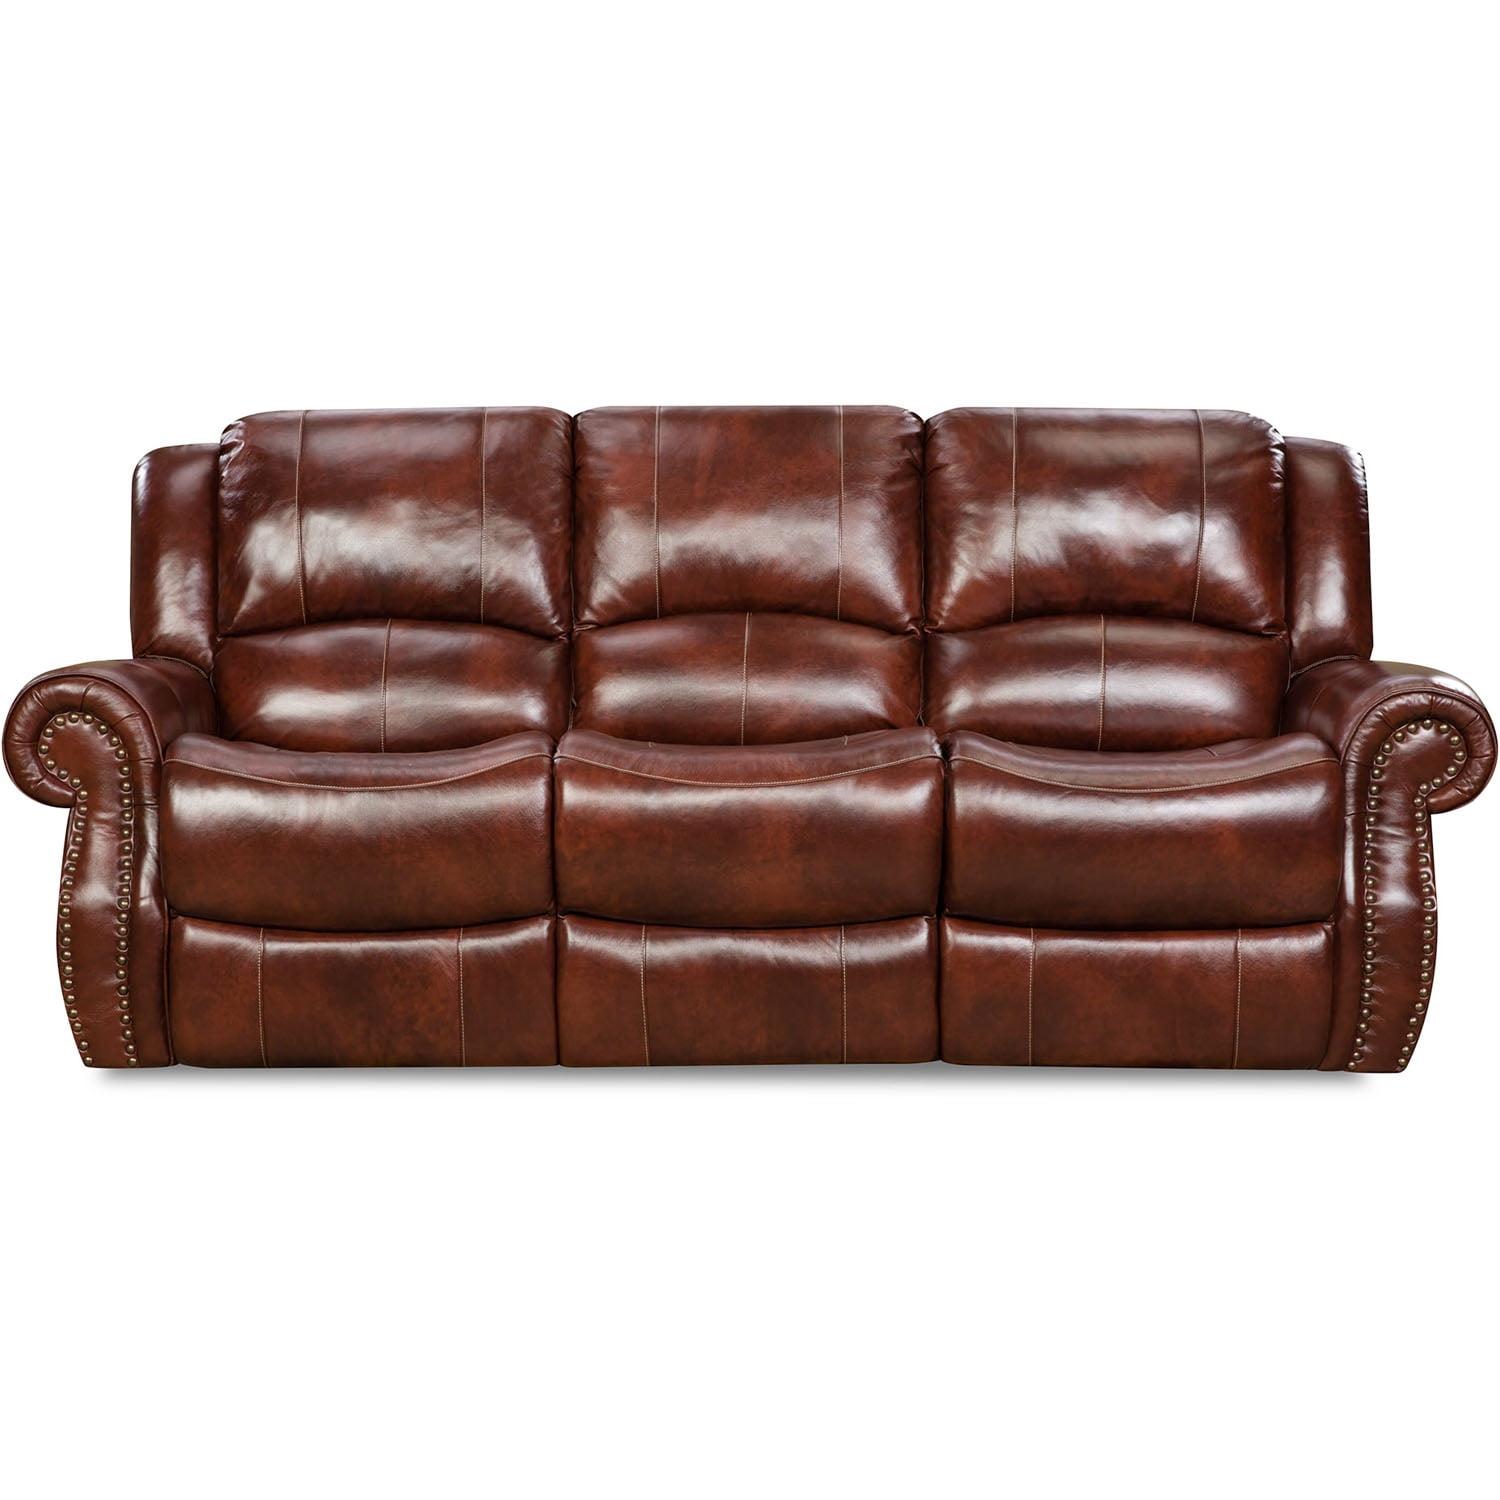 Brown Leather Double Reclining Sofa with Nailhead Trim